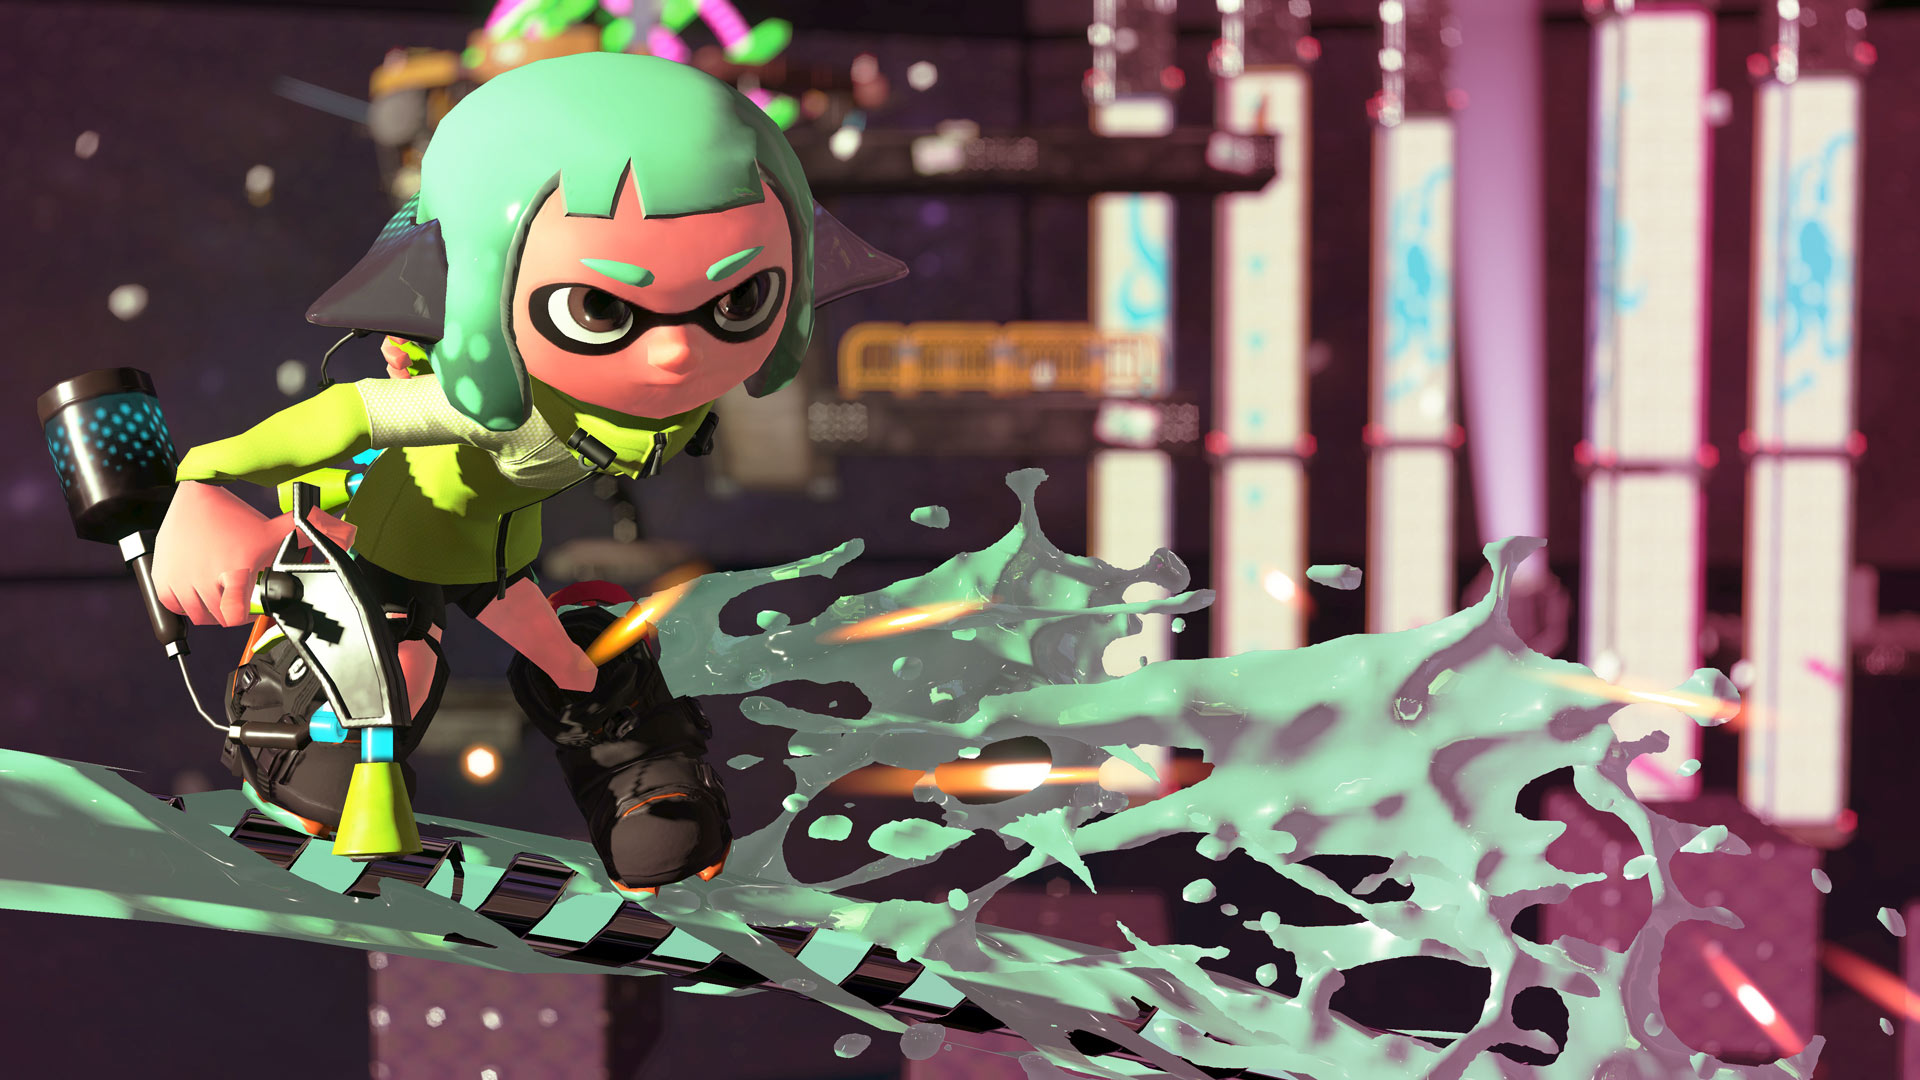 A Splatoon character with green hair spurts  green paint from a weapon.